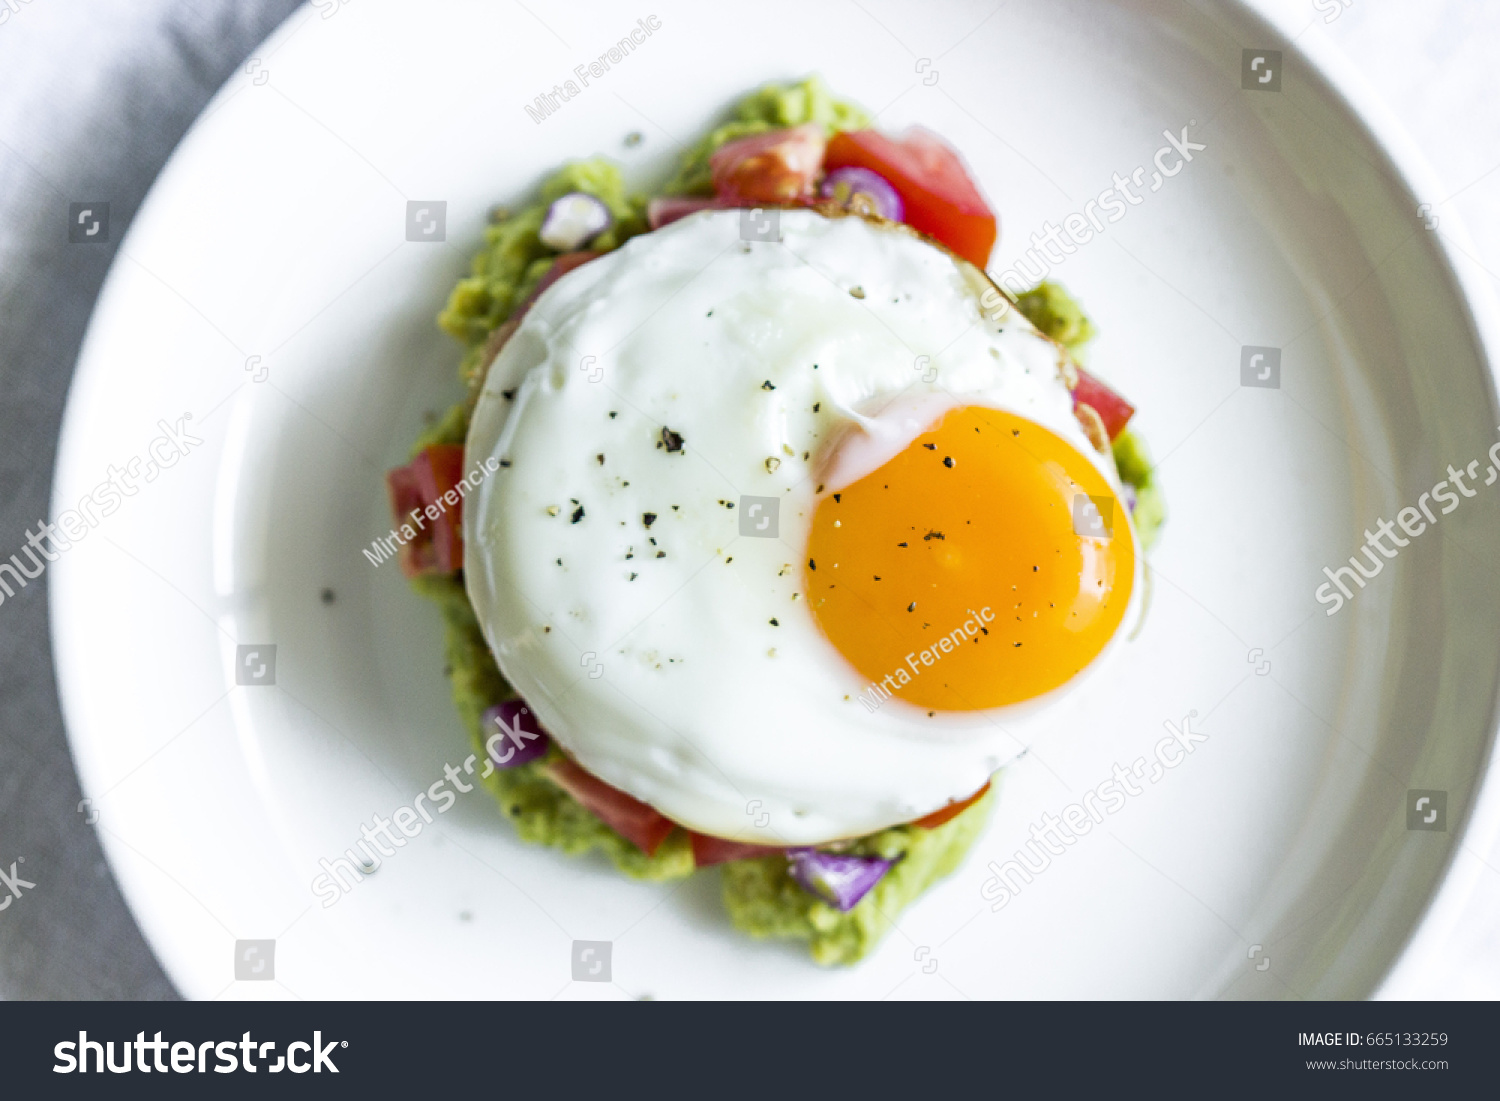 egg sunny side up on a bed of guacamole 
egg sunny side up on tomato tartar with avocado #665133259